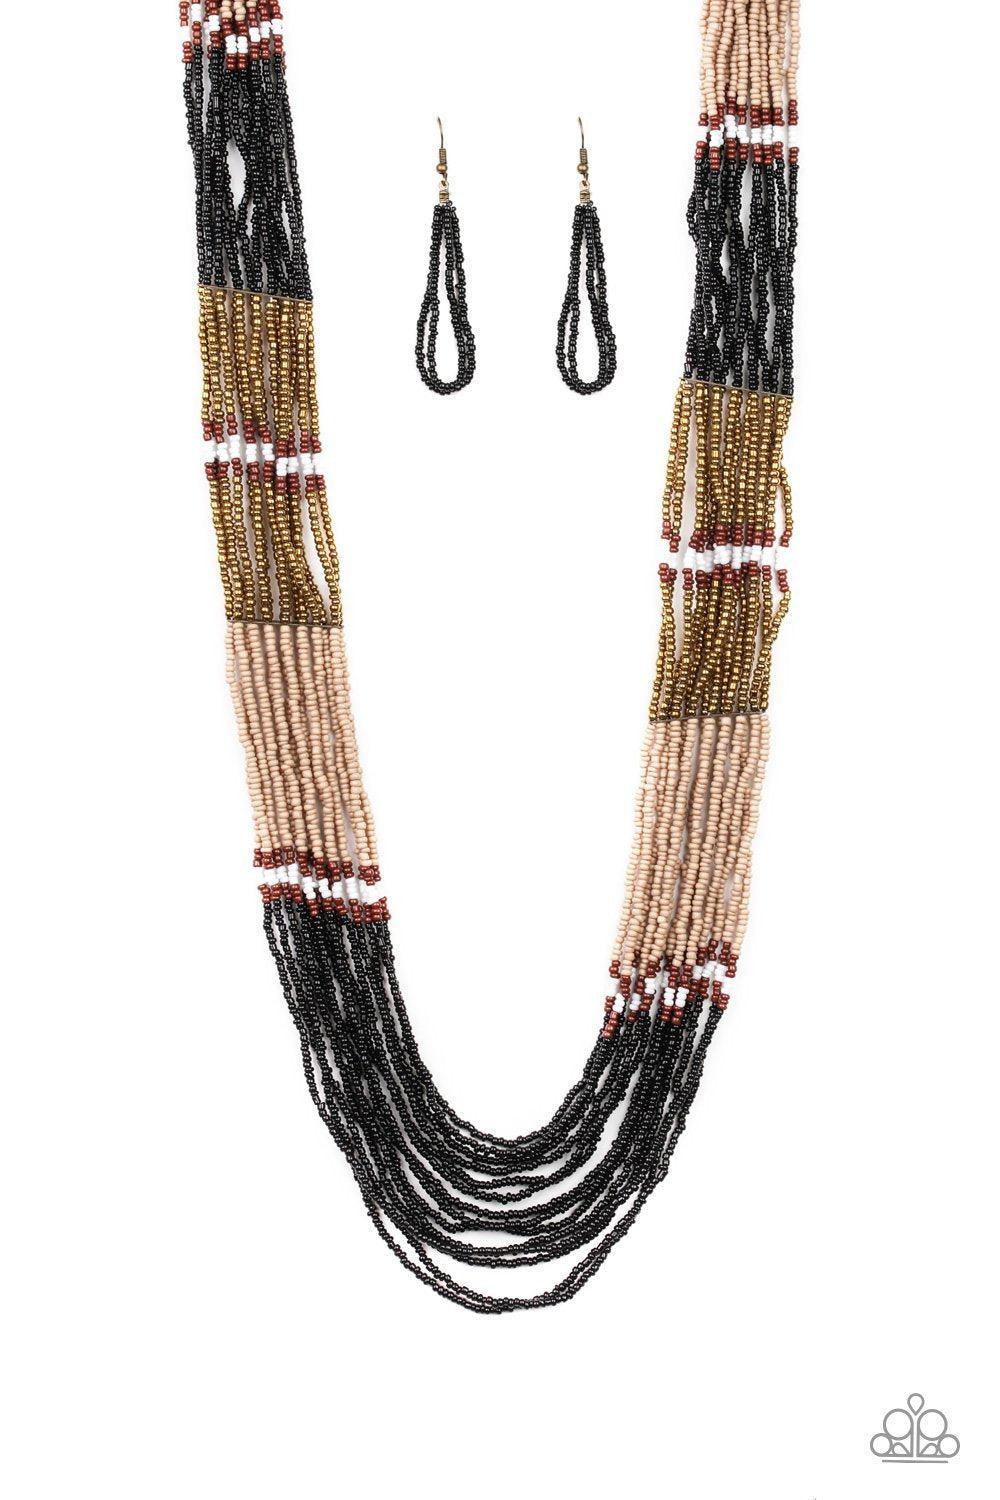 Rio Roamer - Black and Tan Seed Bead Necklace and matching Earrings - Paparazzi Accessories-CarasShop.com - $5 Jewelry by Cara Jewels